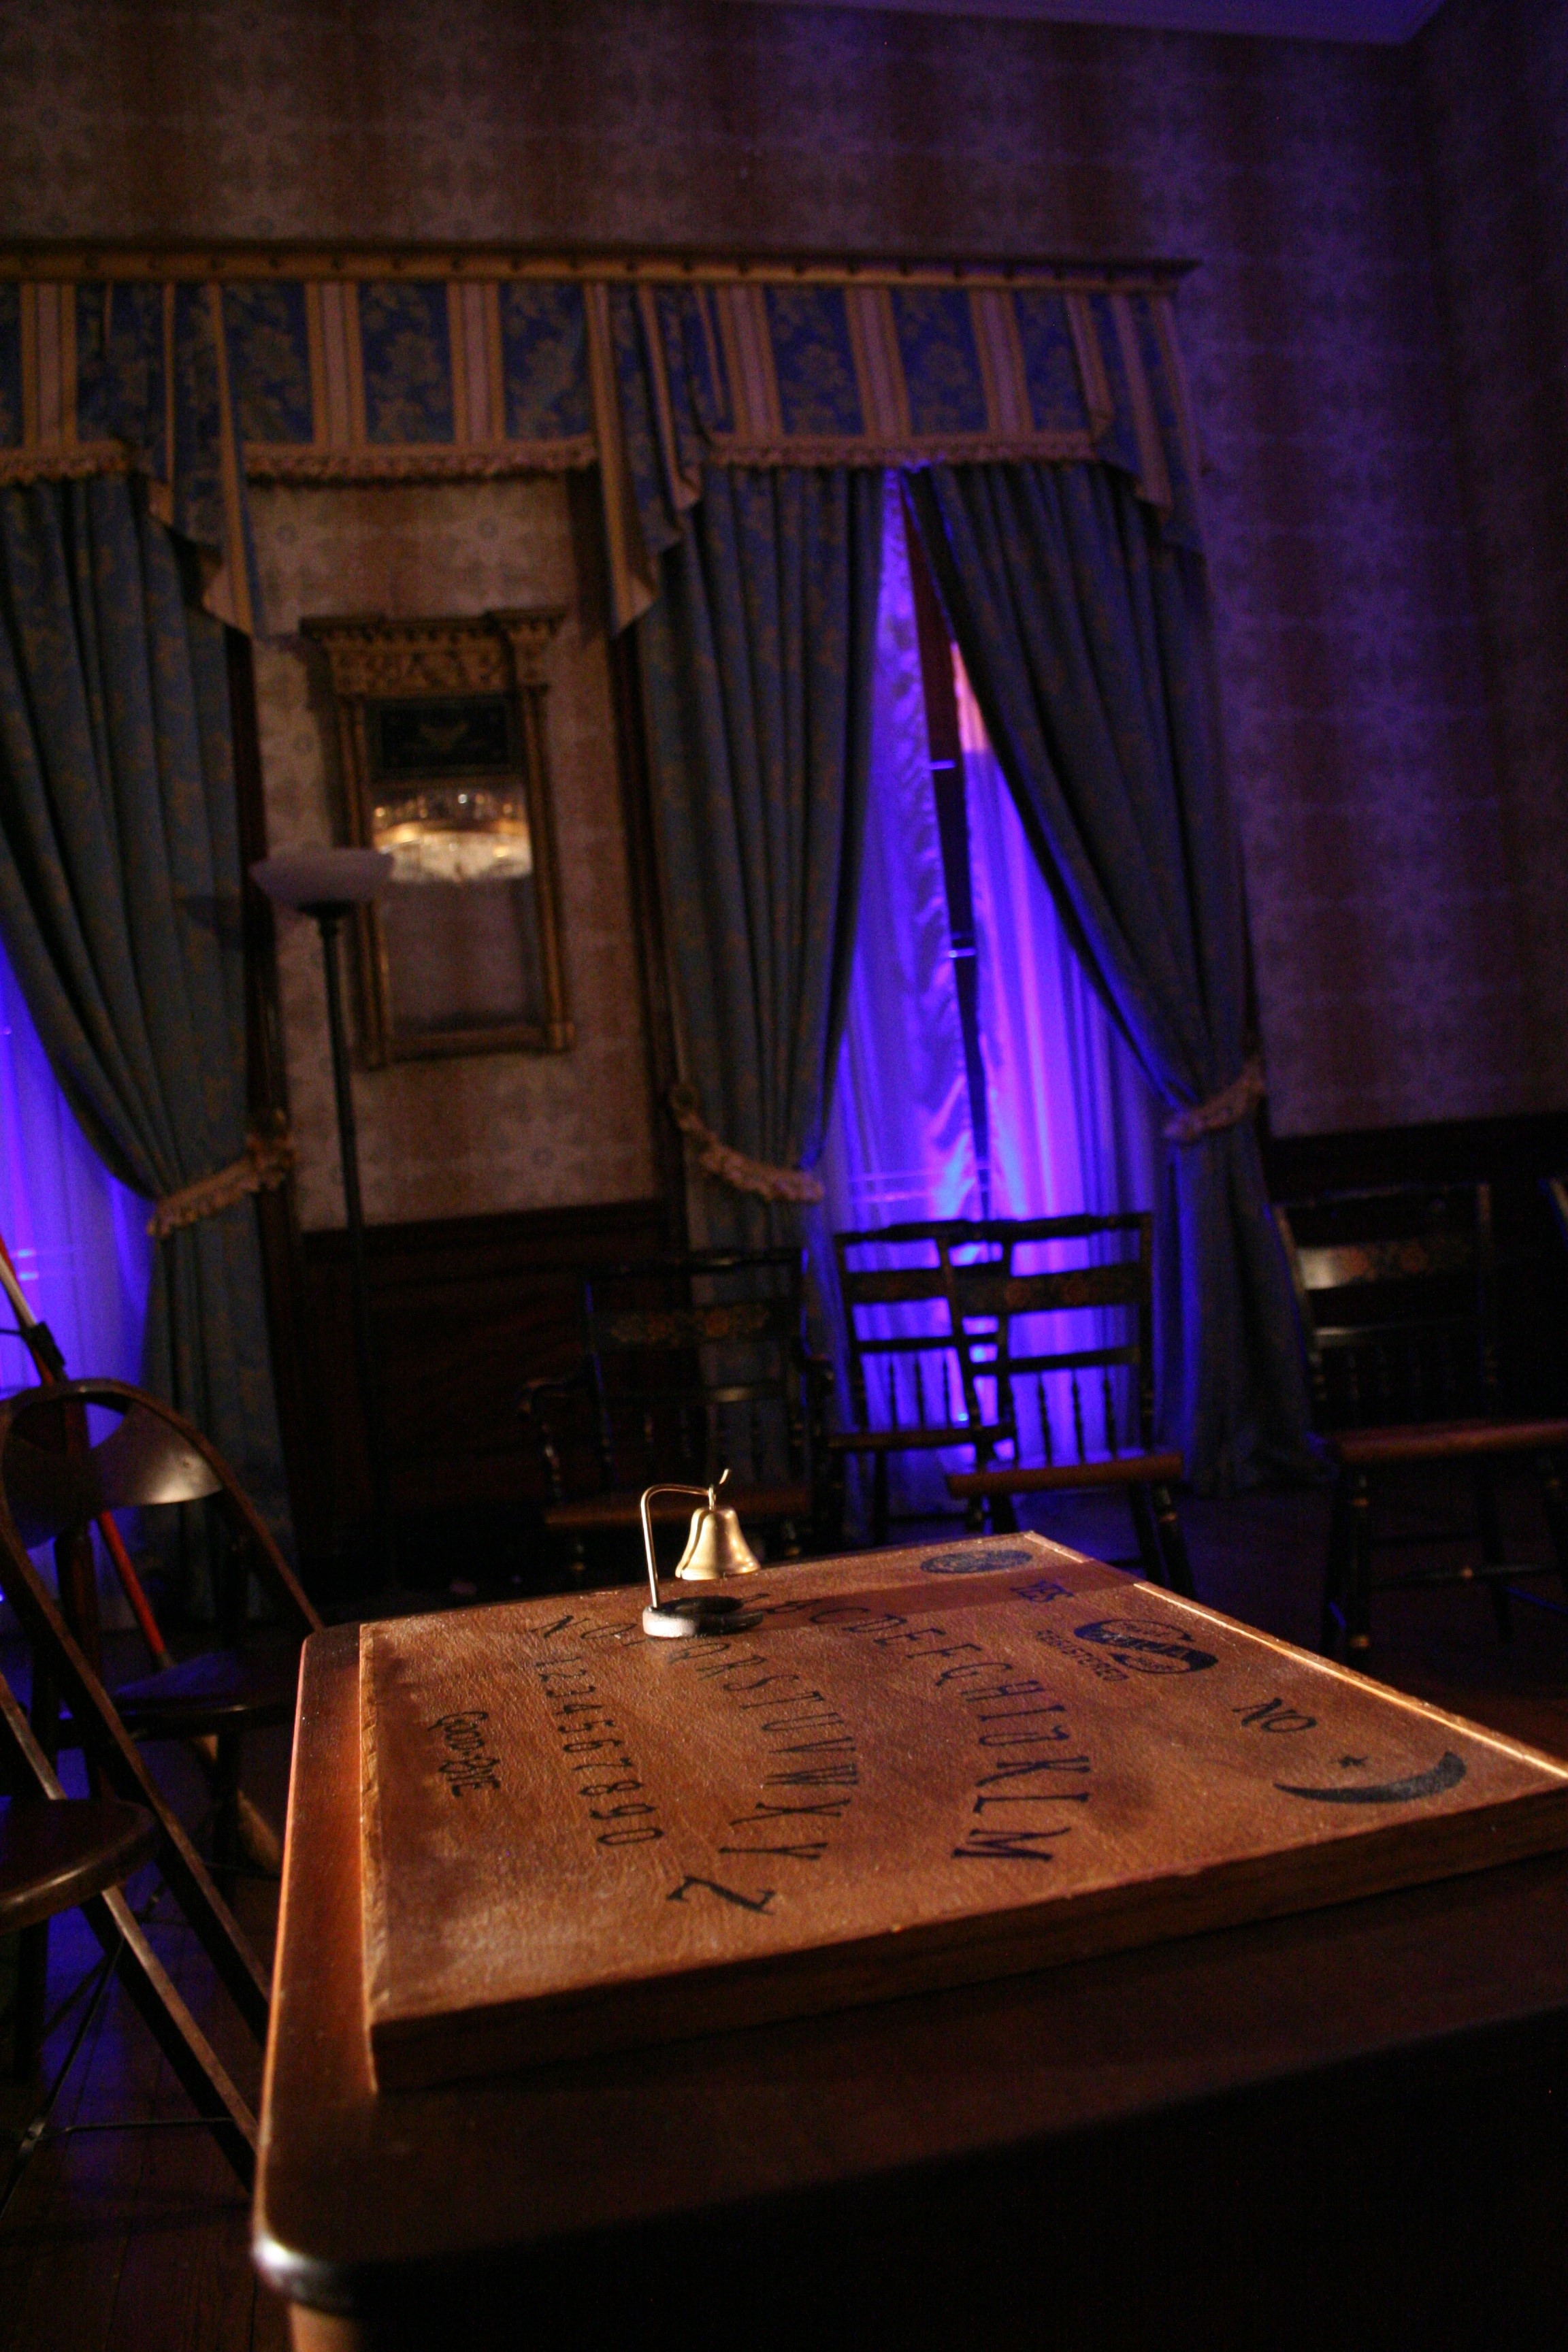 A purple light on curtains in the background, Ouija board and bell in the foreground.